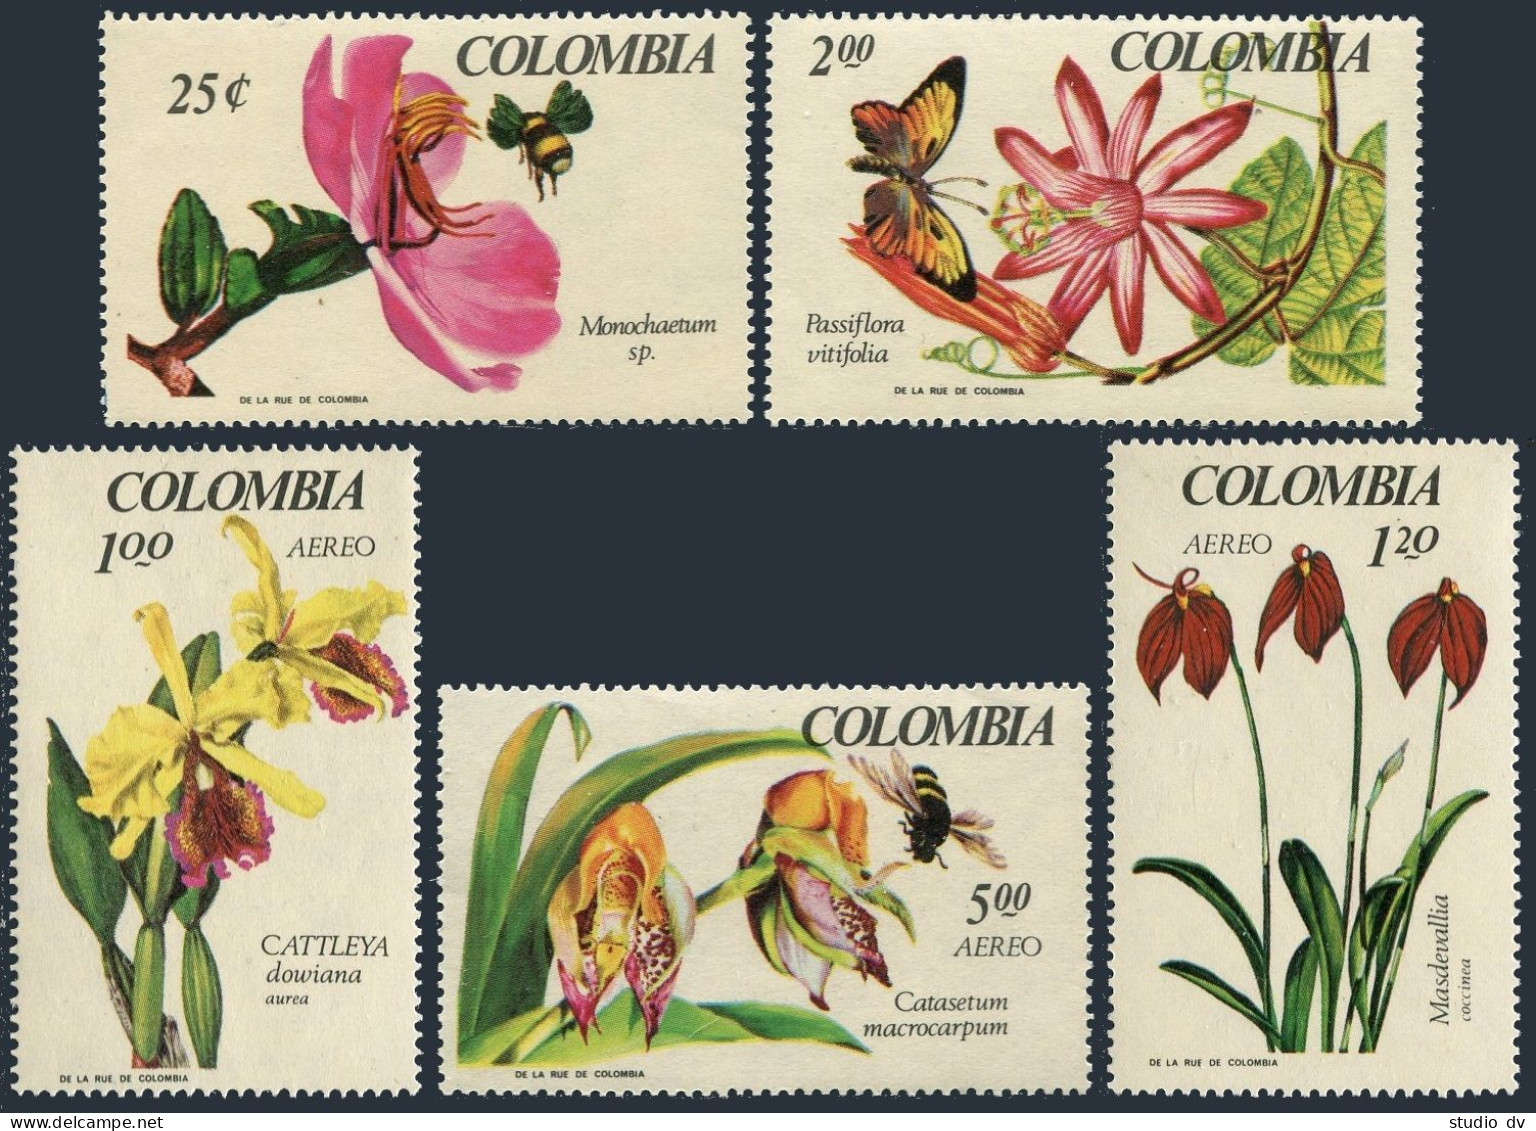 Colombia 768-C491, C491a Sheet, MNH. Mi 1098-1102, Bl.27 Orchid EXPO-1967. Bee. - Colombia